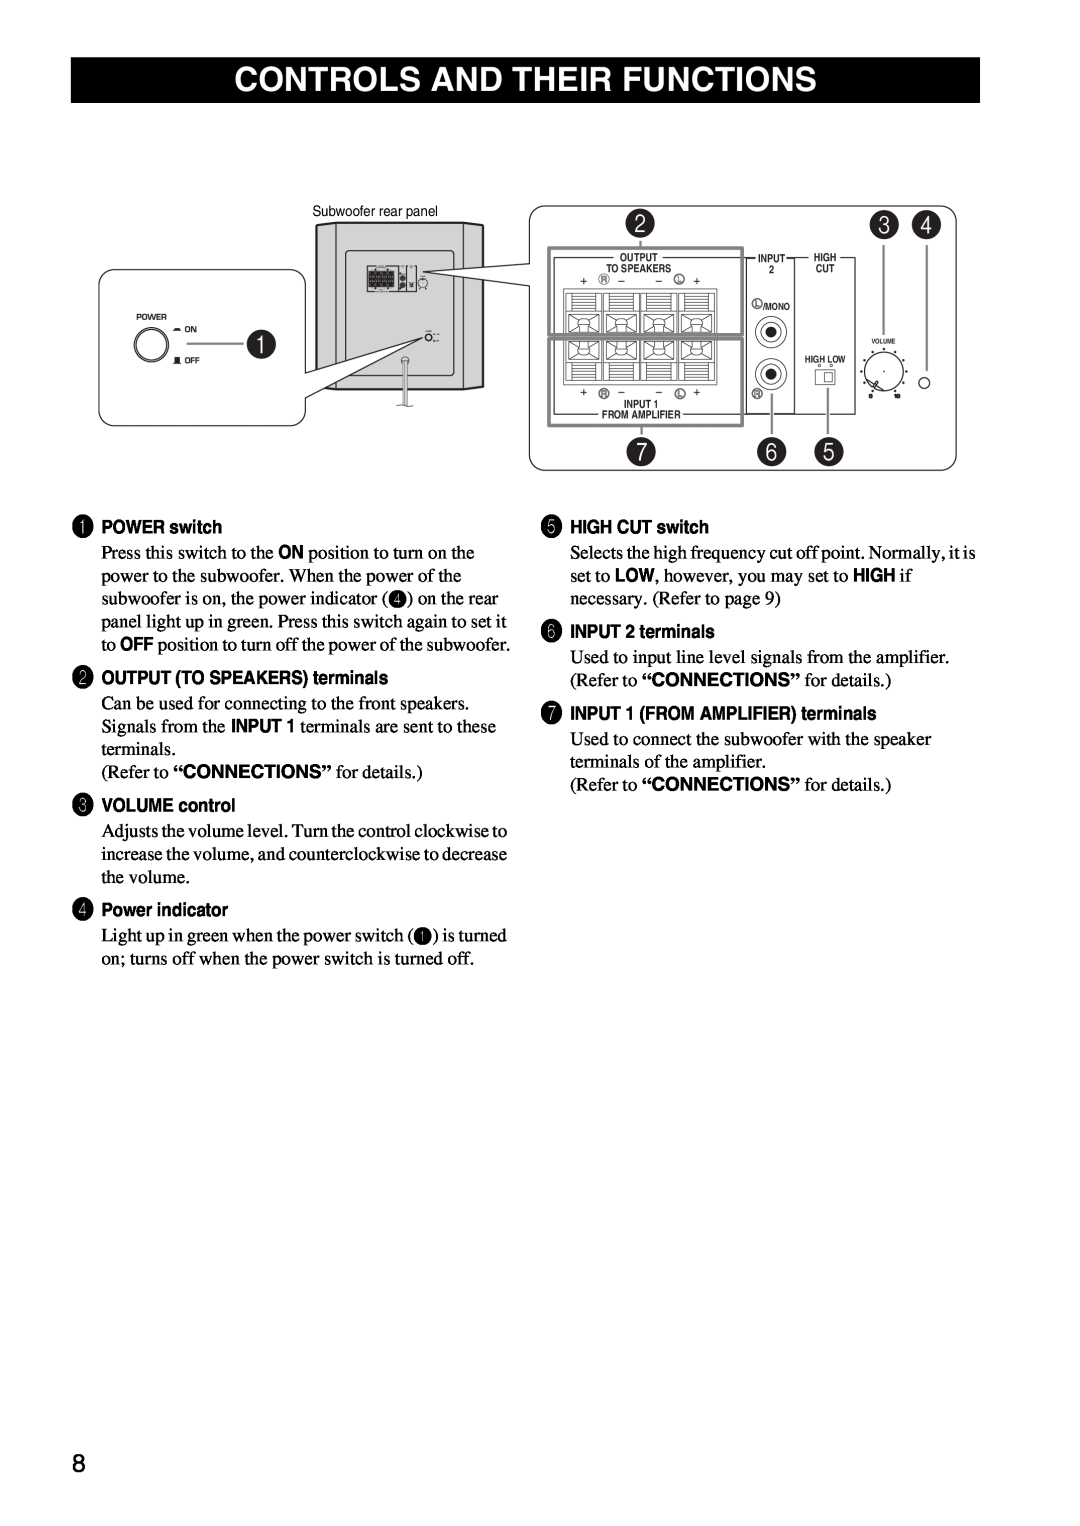 Yamaha YSTSW216BL owner manual Controls And Their Functions, POWER switch, OUTPUT TO SPEAKERS terminals, VOLUME control 